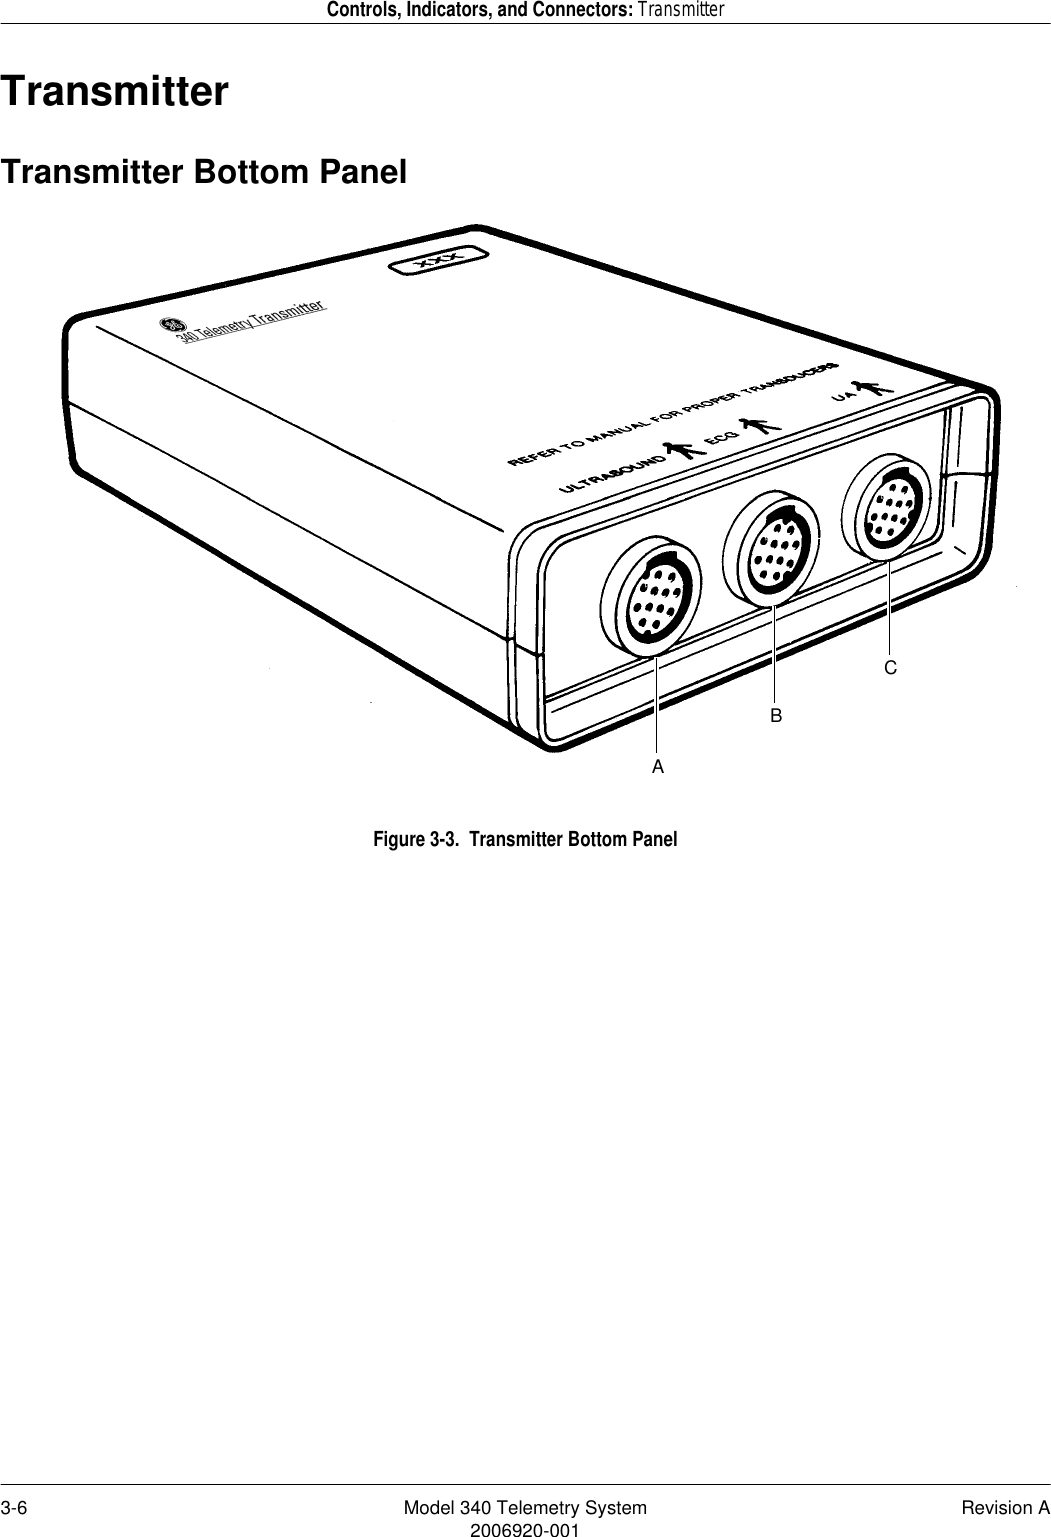 3-6 Model 340 Telemetry System Revision A2006920-001Controls, Indicators, and Connectors: TransmitterTransmitterTransmitter Bottom PanelFigure 3-3.  Transmitter Bottom PanelACB